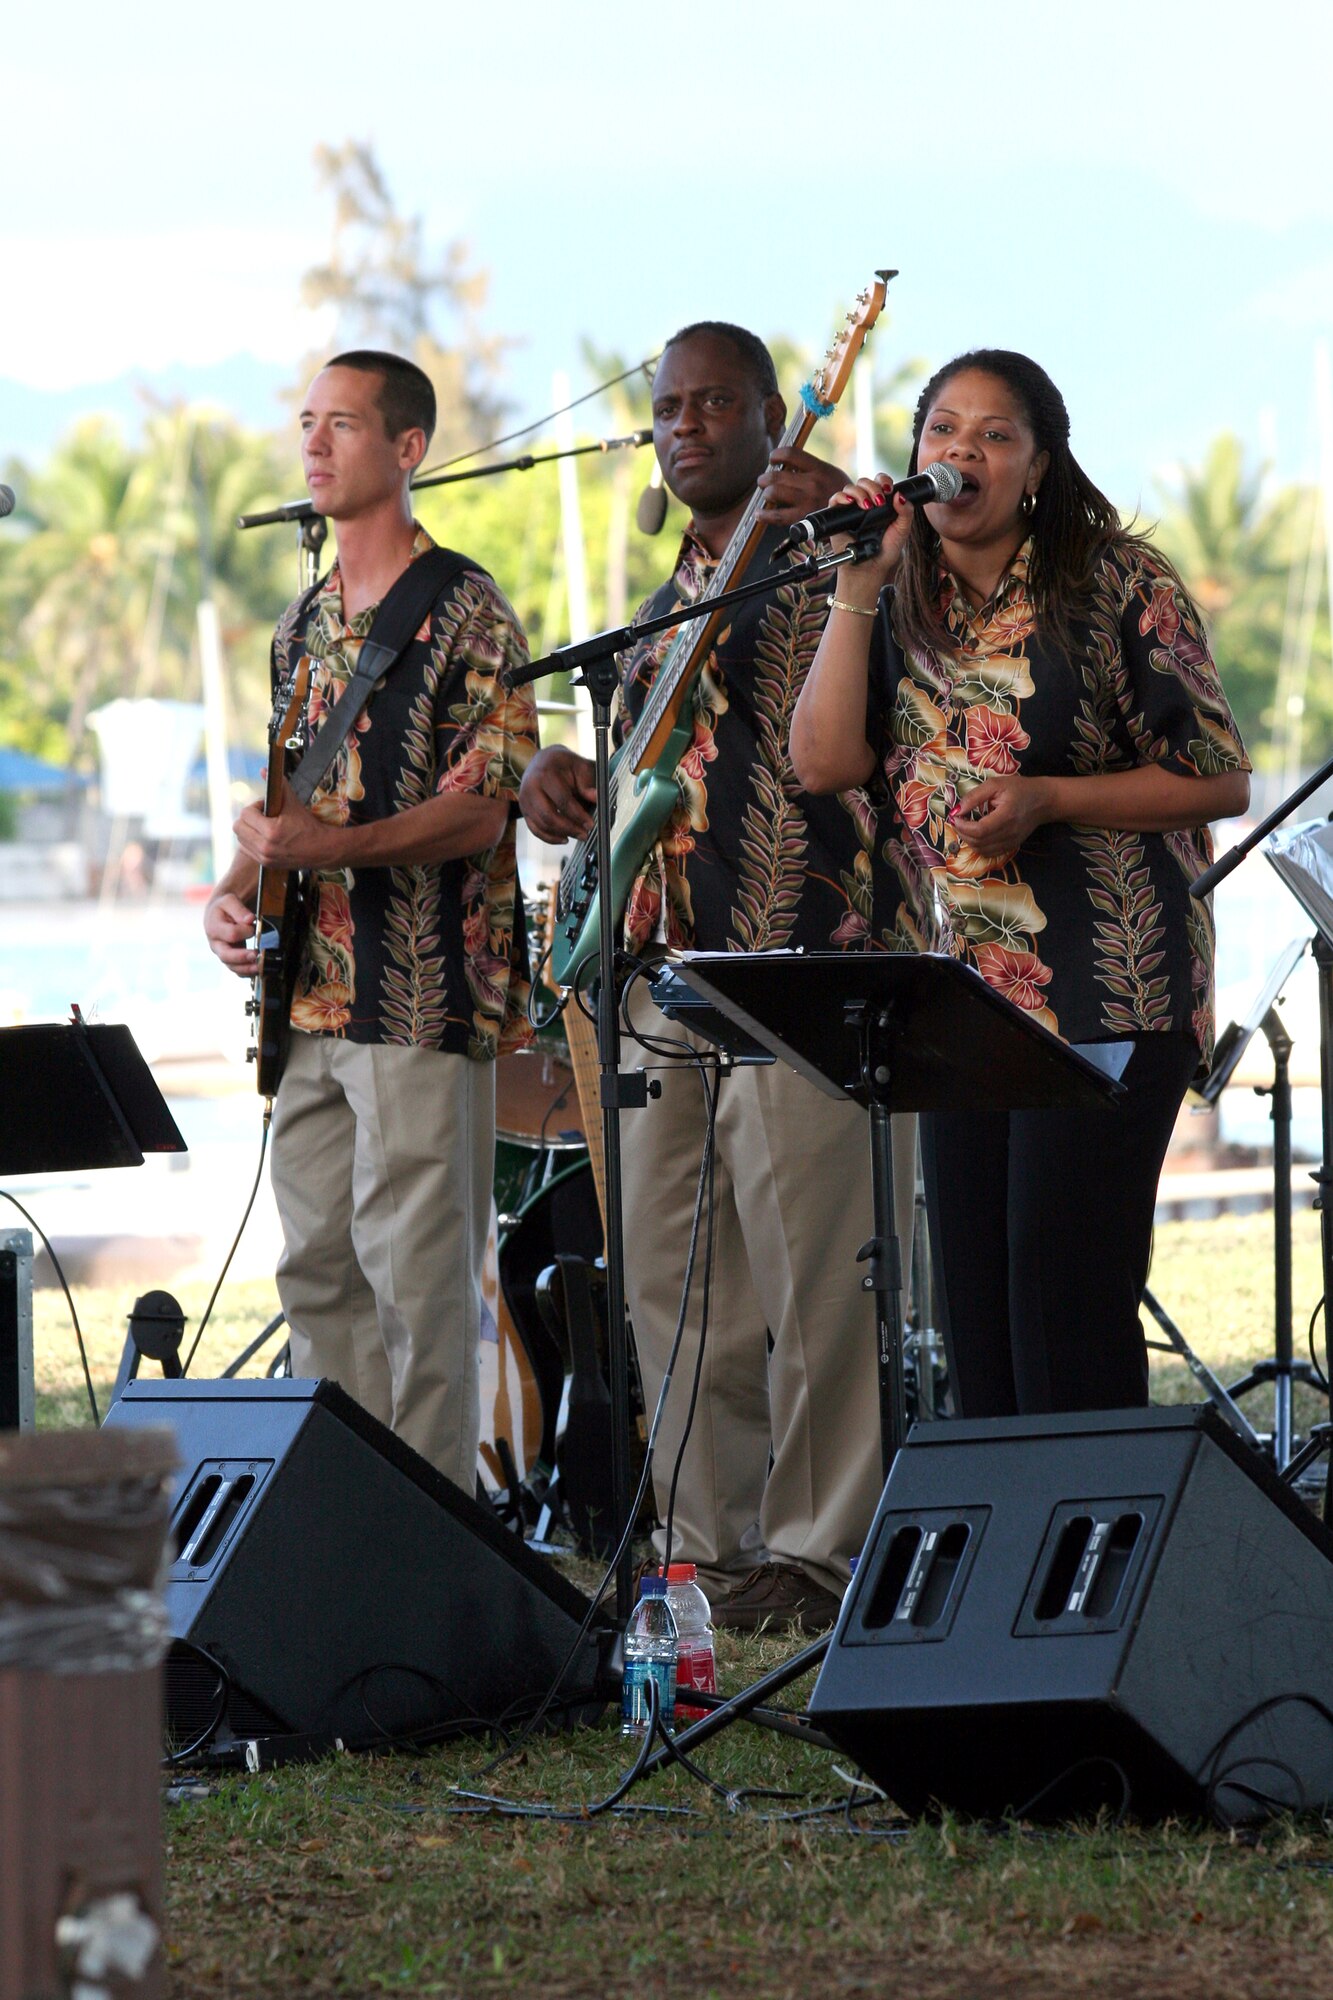 HICKAM AIR FORCE BASE, Hawaii – U.S. Air Force Staff Sergeant John Kukan, guitarits, Staff Sergeant Terry J. Grace, bass, and Staff Sergeant Tamiko Boone, vocalist,, members of the Air Force Band of the Pacific, ‘Hana Hou’, perform here May 18 during a concert hosted by Col. J.J. Torres, 15th Airlift Wing commander.  Hana Hou’s performances delight military and civilian audiences throughout Hawaii and the Pacific.  (US Air Force photo/ Master Sgt. Cherie McNeill)  